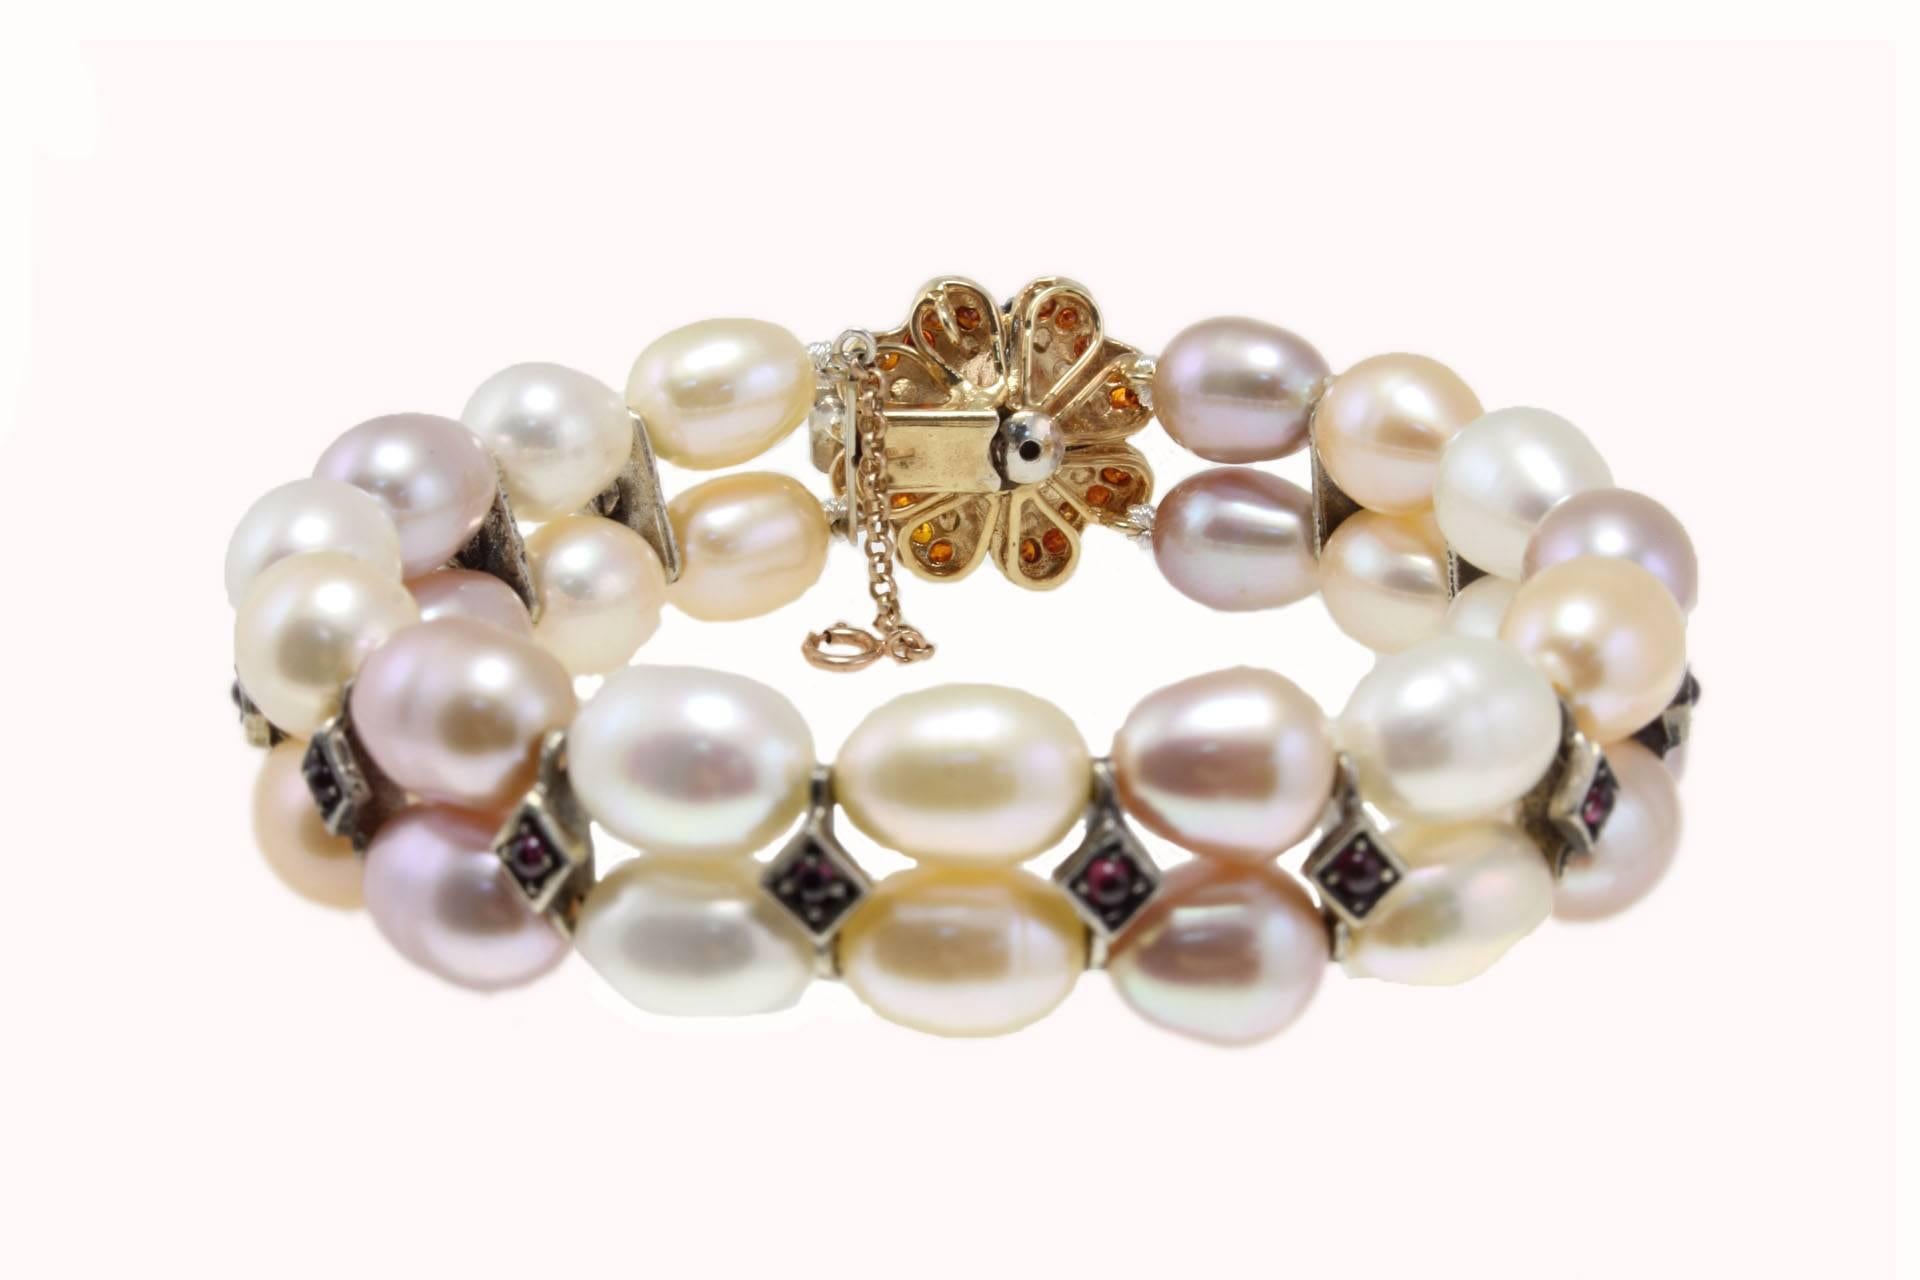 Classic beaded bracelet embellished of a clasp of shiny zircons  and details in garnets. Settled on 9 Kt rose gold and silver.
Tot weight 42.7 g
Gemstone 0.68  ct
Pearls 31.3 g
Garnets 1.05 ct

Rf. efe